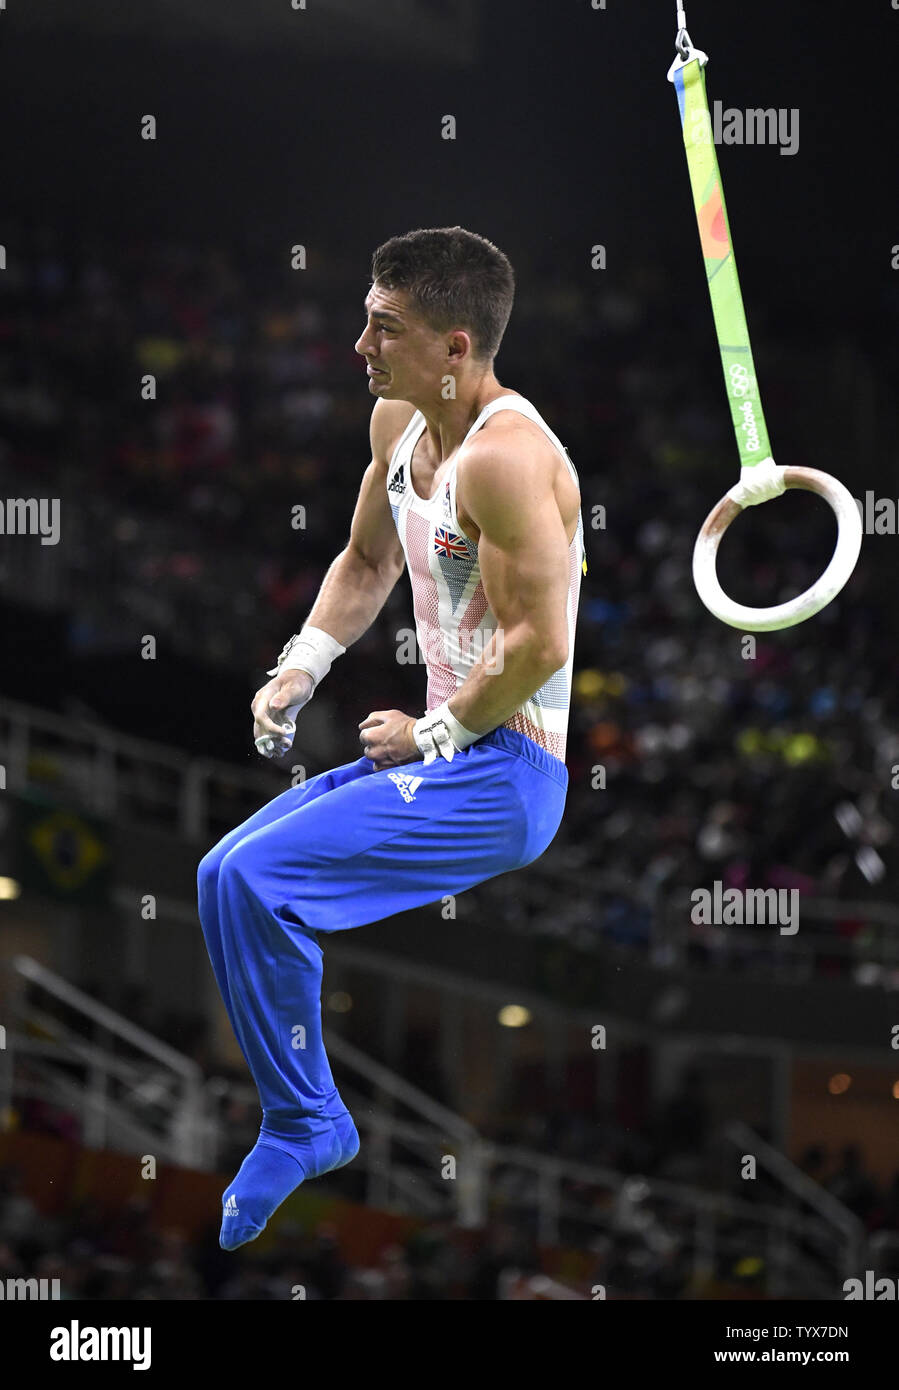 Great Britain S Gymnast Max Whitlock Dismounts After His Routine On The